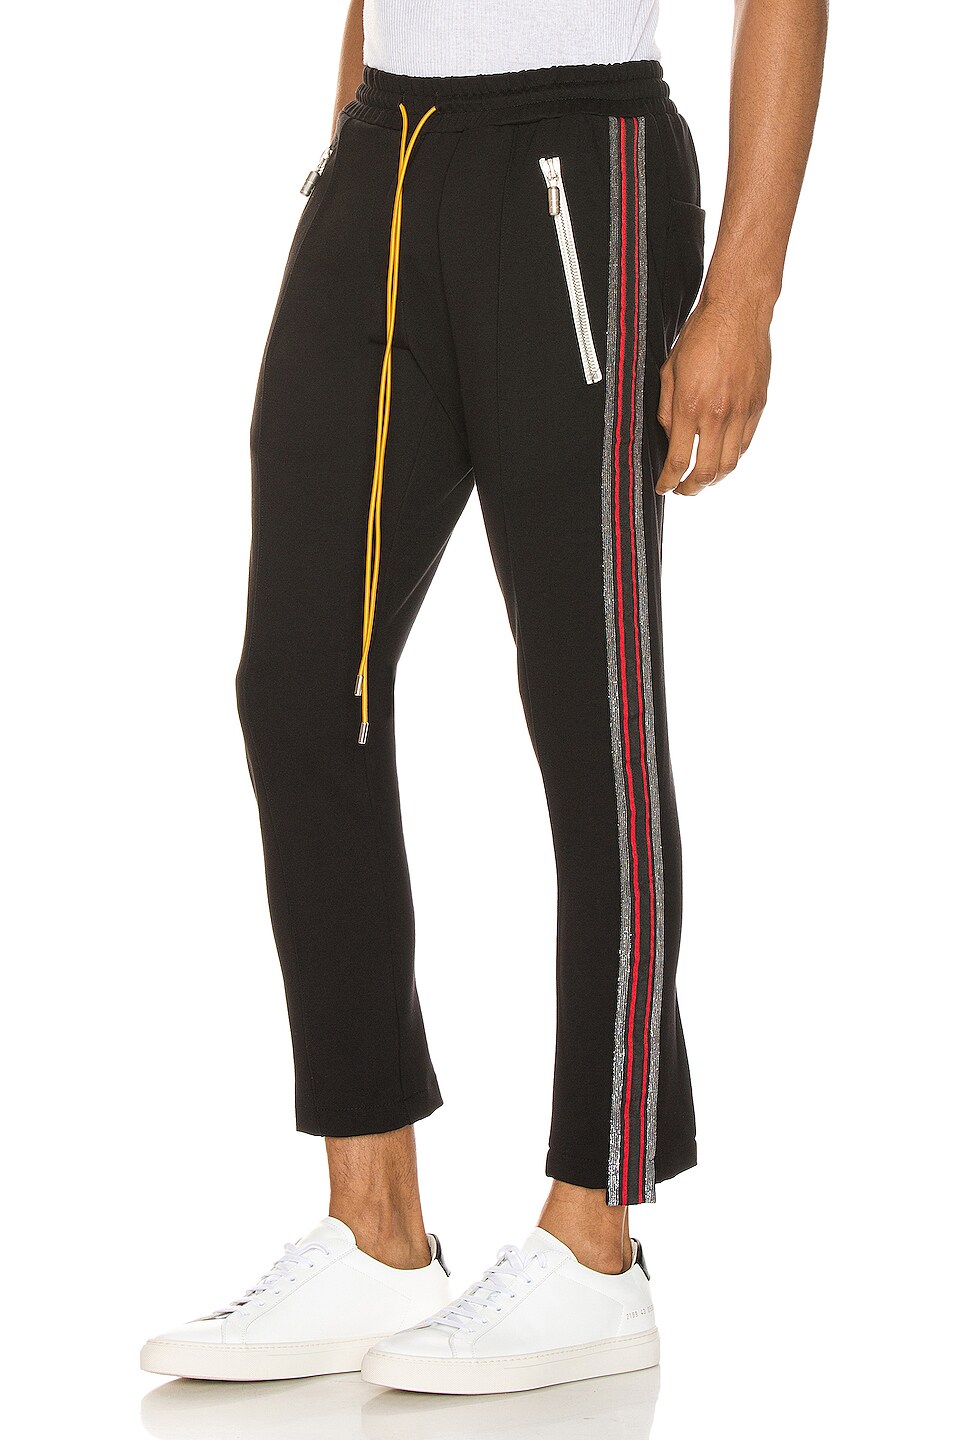 Image 1 of Rhude Traxedo Pant in Black & Red